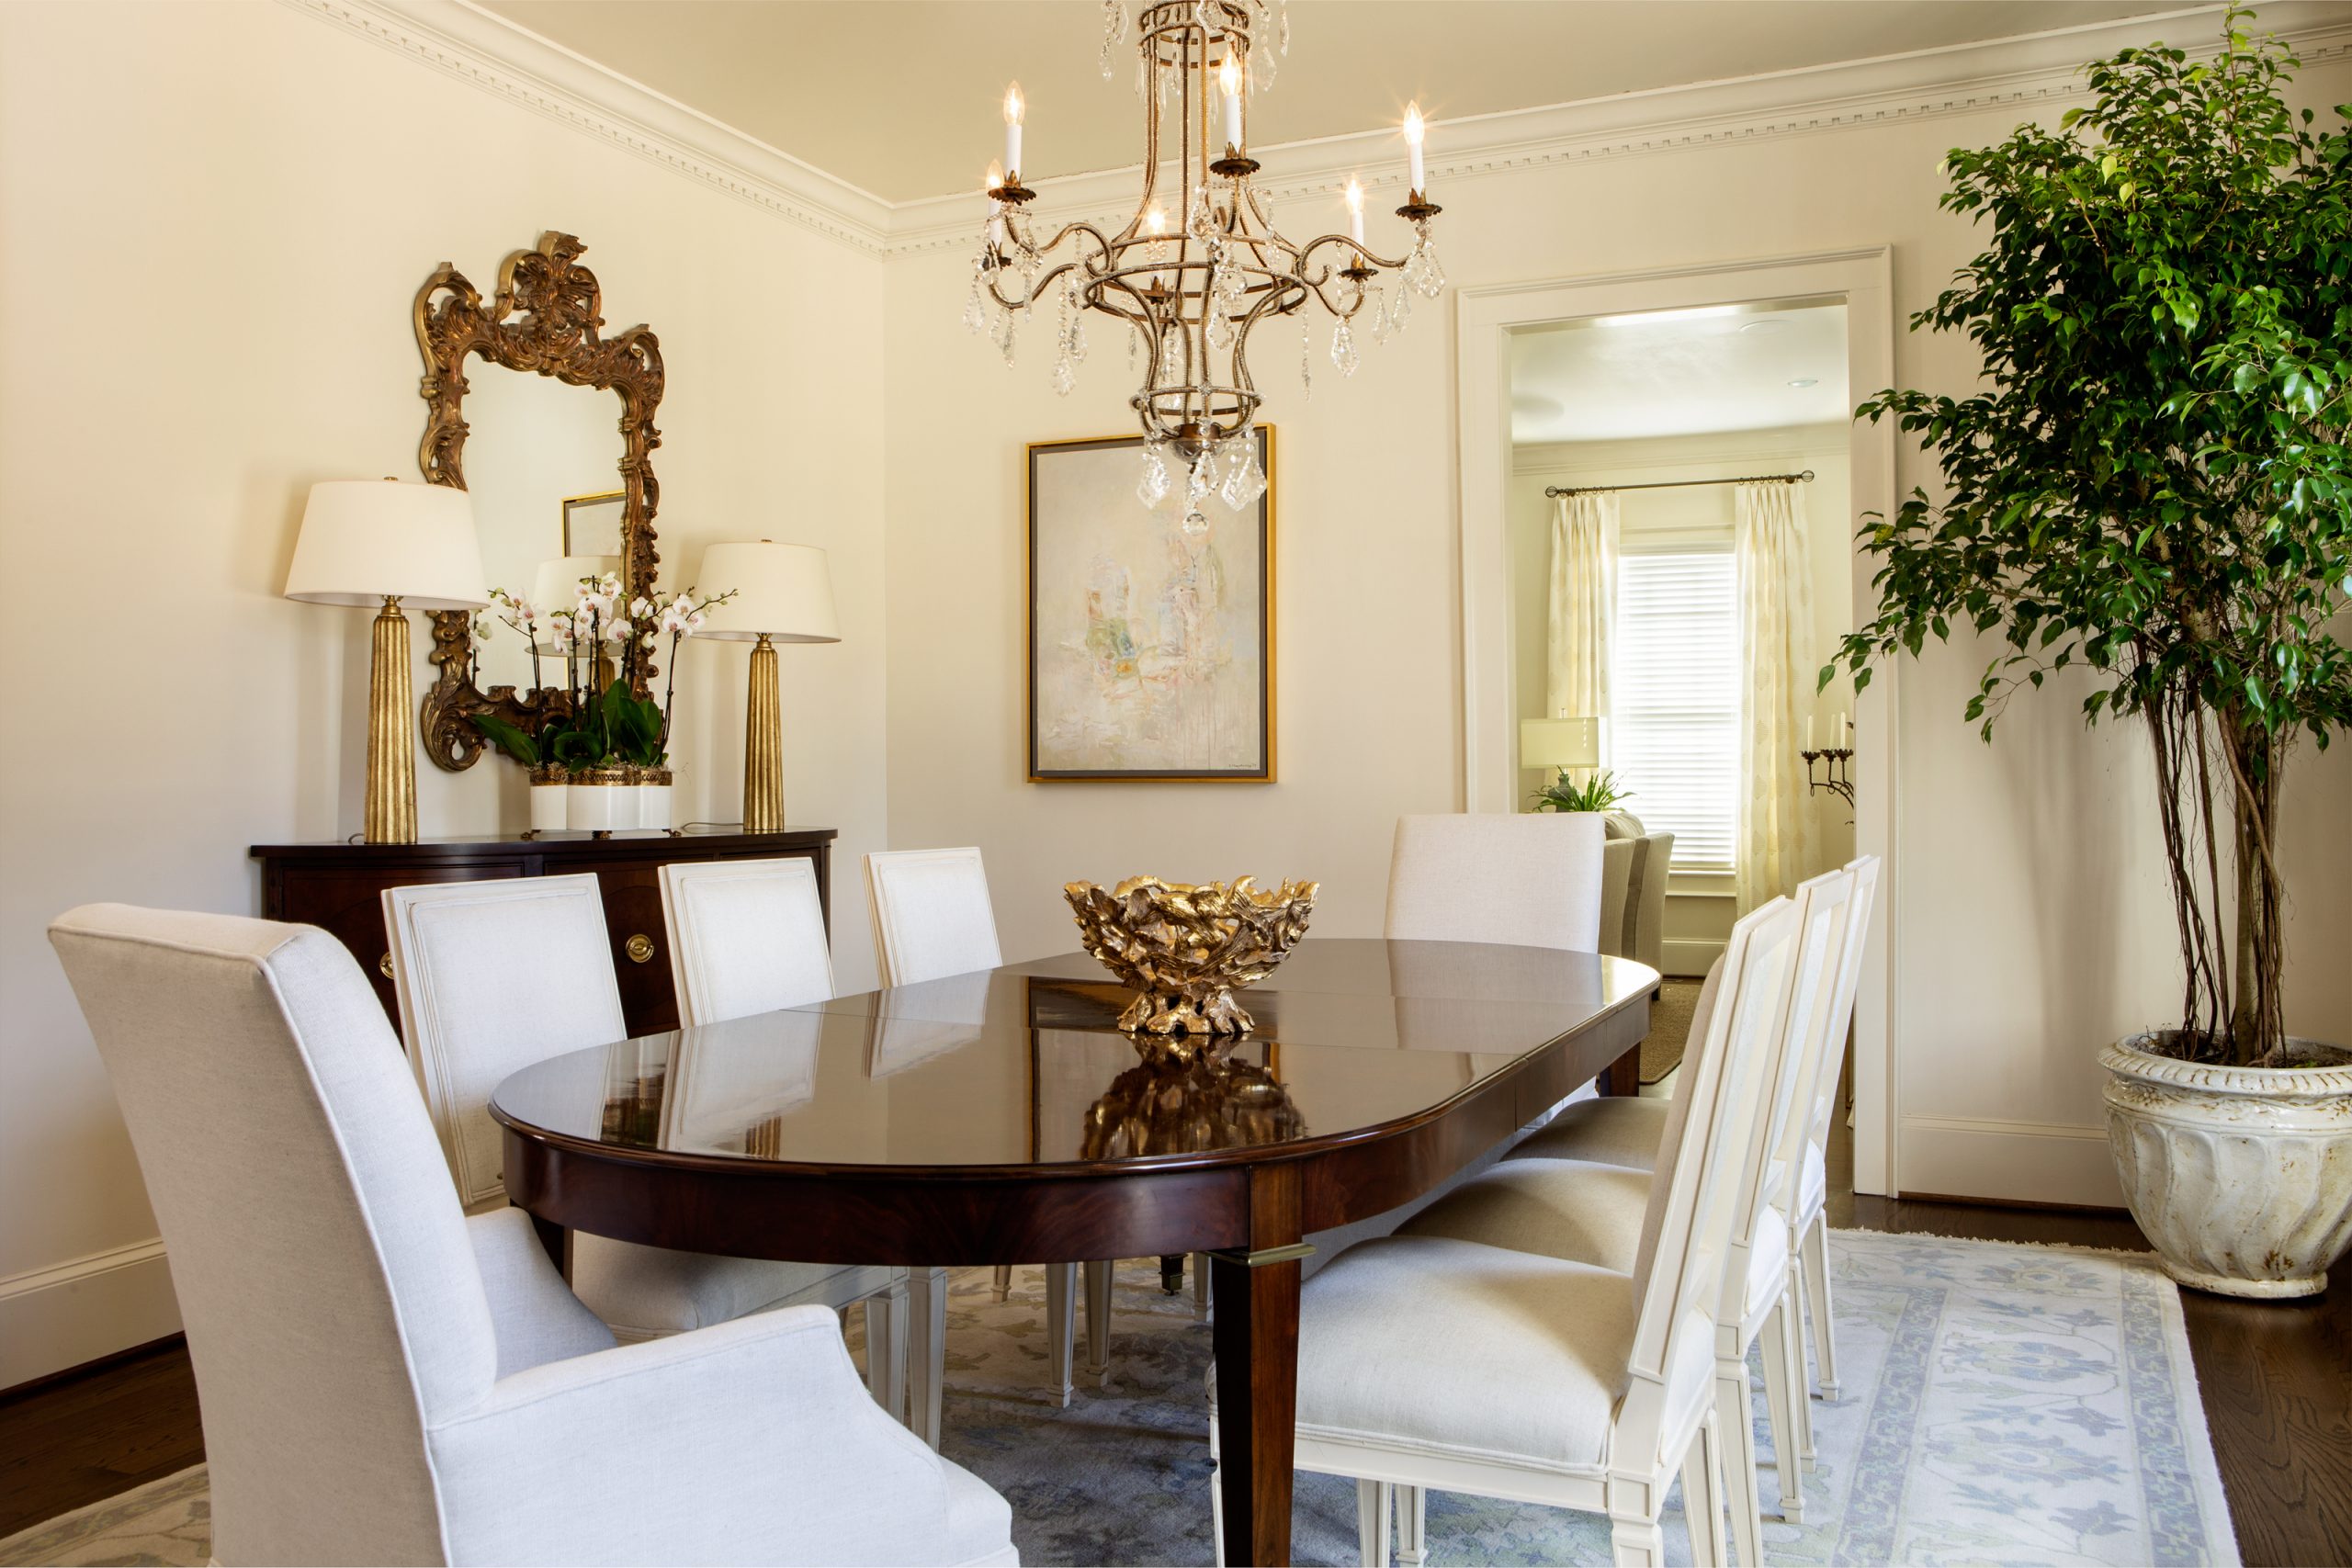 The front formal rooms of the house are framed with dentil molding and more formal pieces of art. Lisa credits her good friend Eveleigh Hughey with Brandon Davidson Interiors for the home’s beautiful decor. 